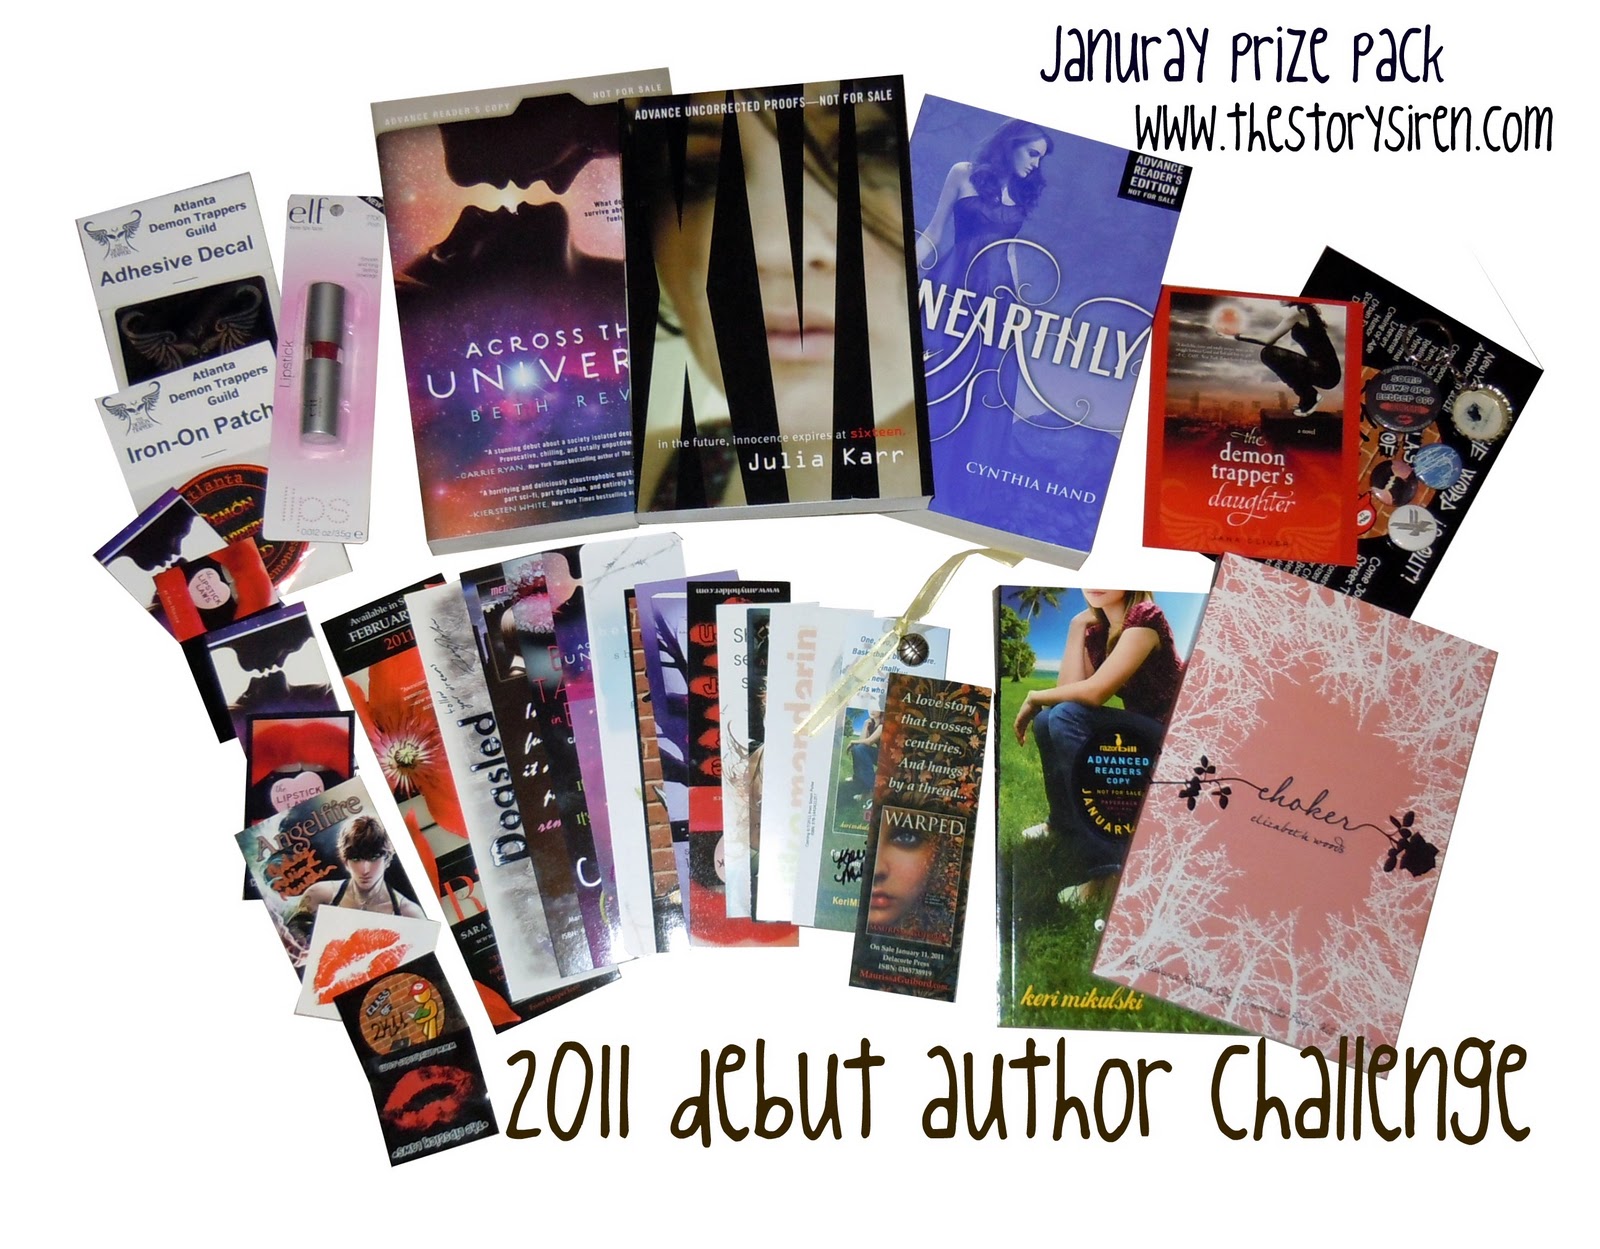 2011 Debute Author Challenge: January